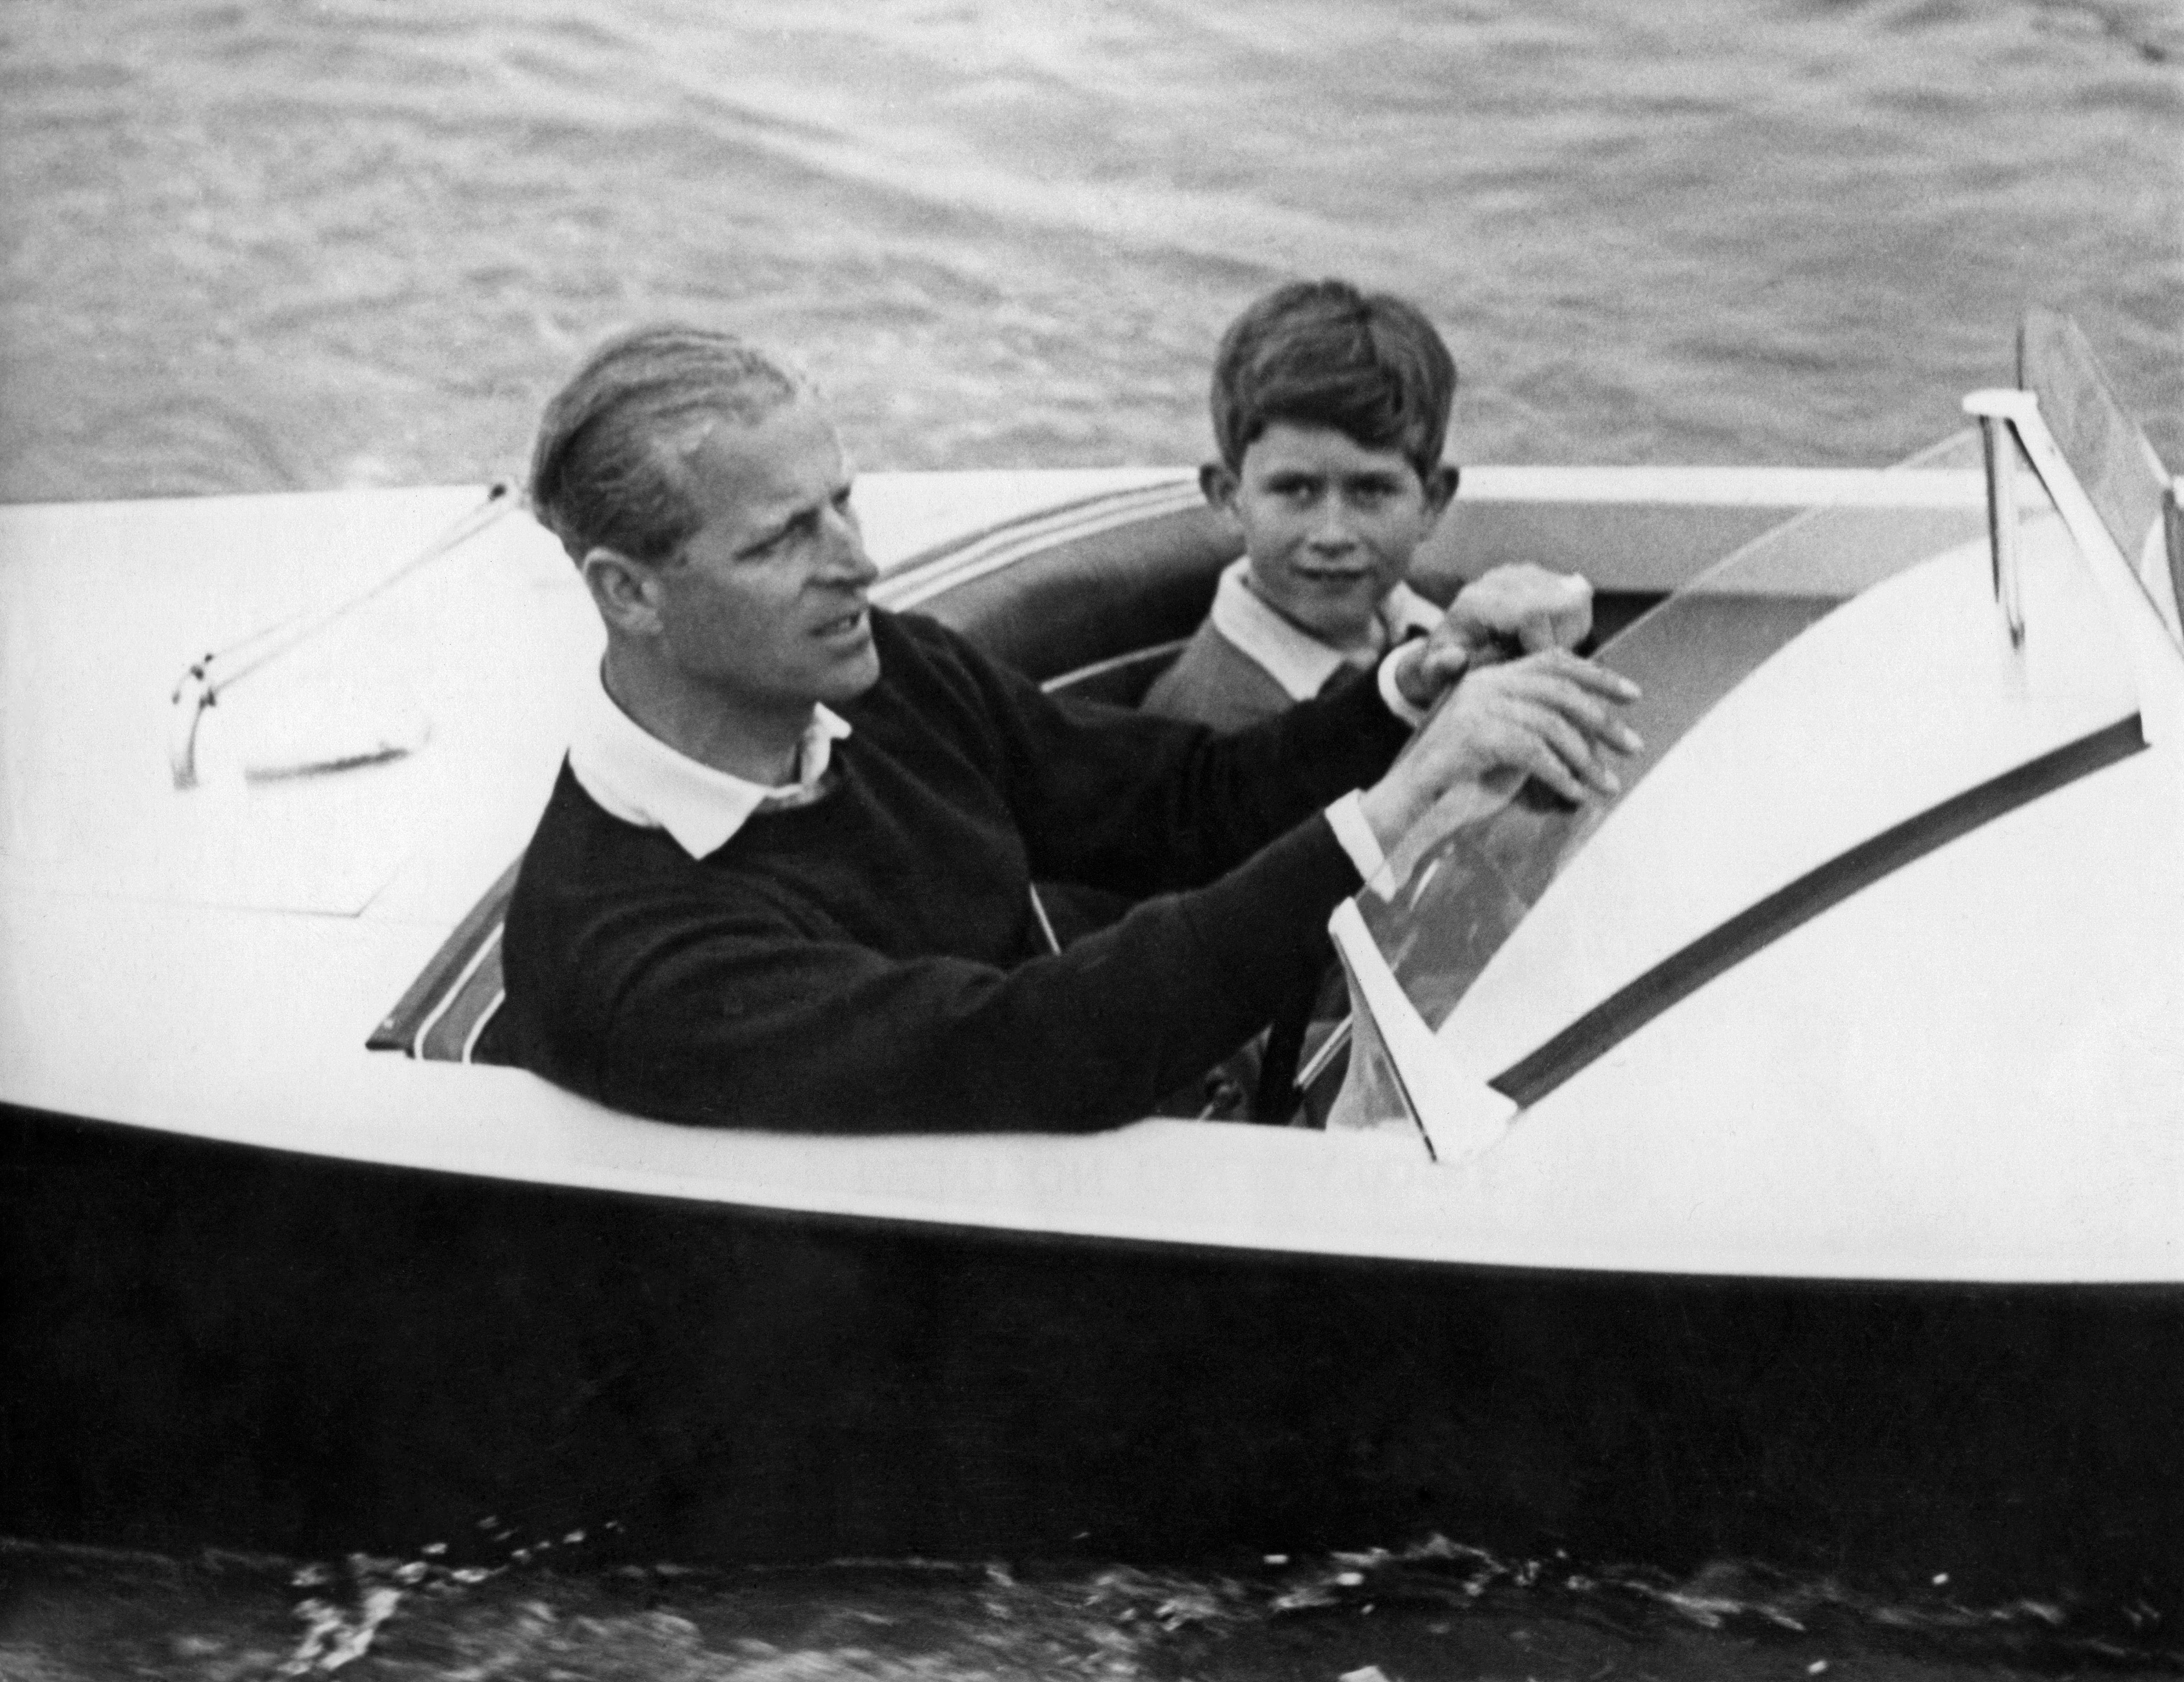 Prince Charles of Wales with his father Prince Philip of Edinburgh on board a boat, 1955